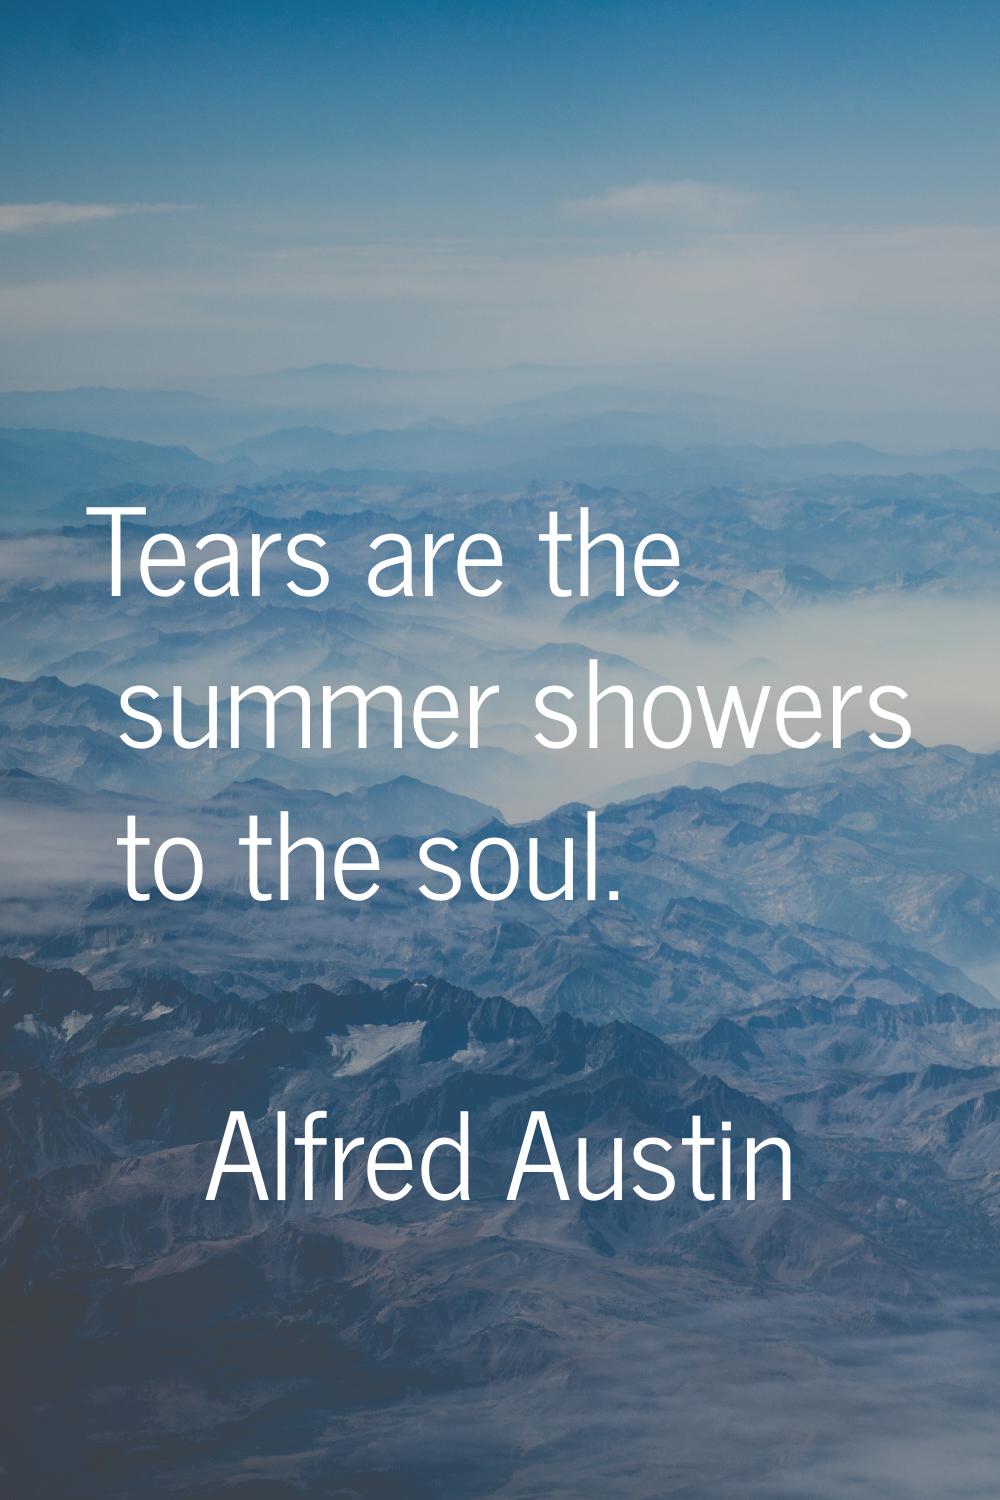 Tears are the summer showers to the soul.